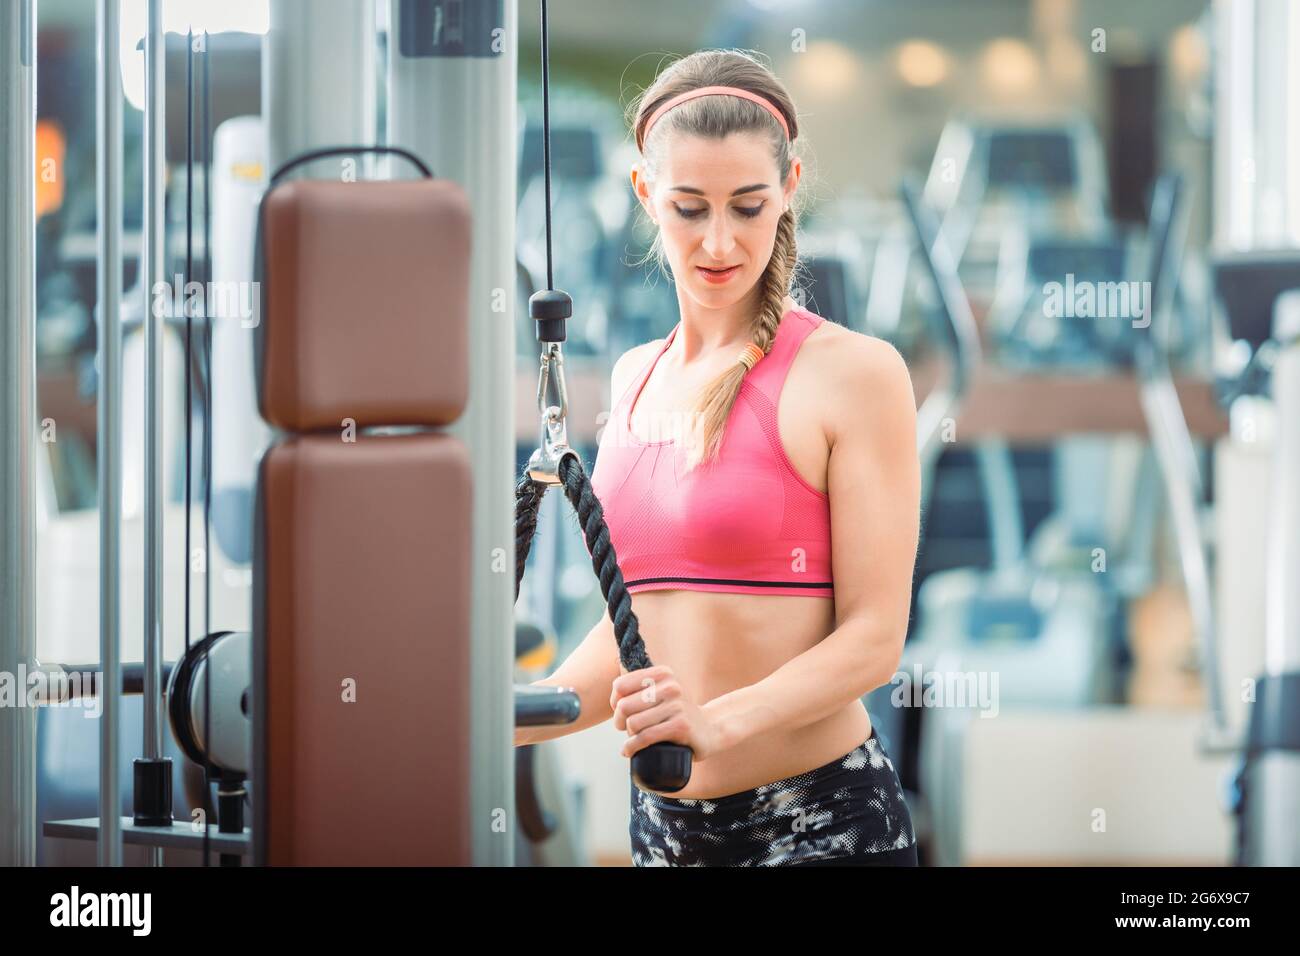 https://c8.alamy.com/comp/2G6X9C7/happy-and-beautiful-fit-woman-wearing-pink-fitness-bra-while-exercising-cable-rope-triceps-extension-at-the-gym-2G6X9C7.jpg